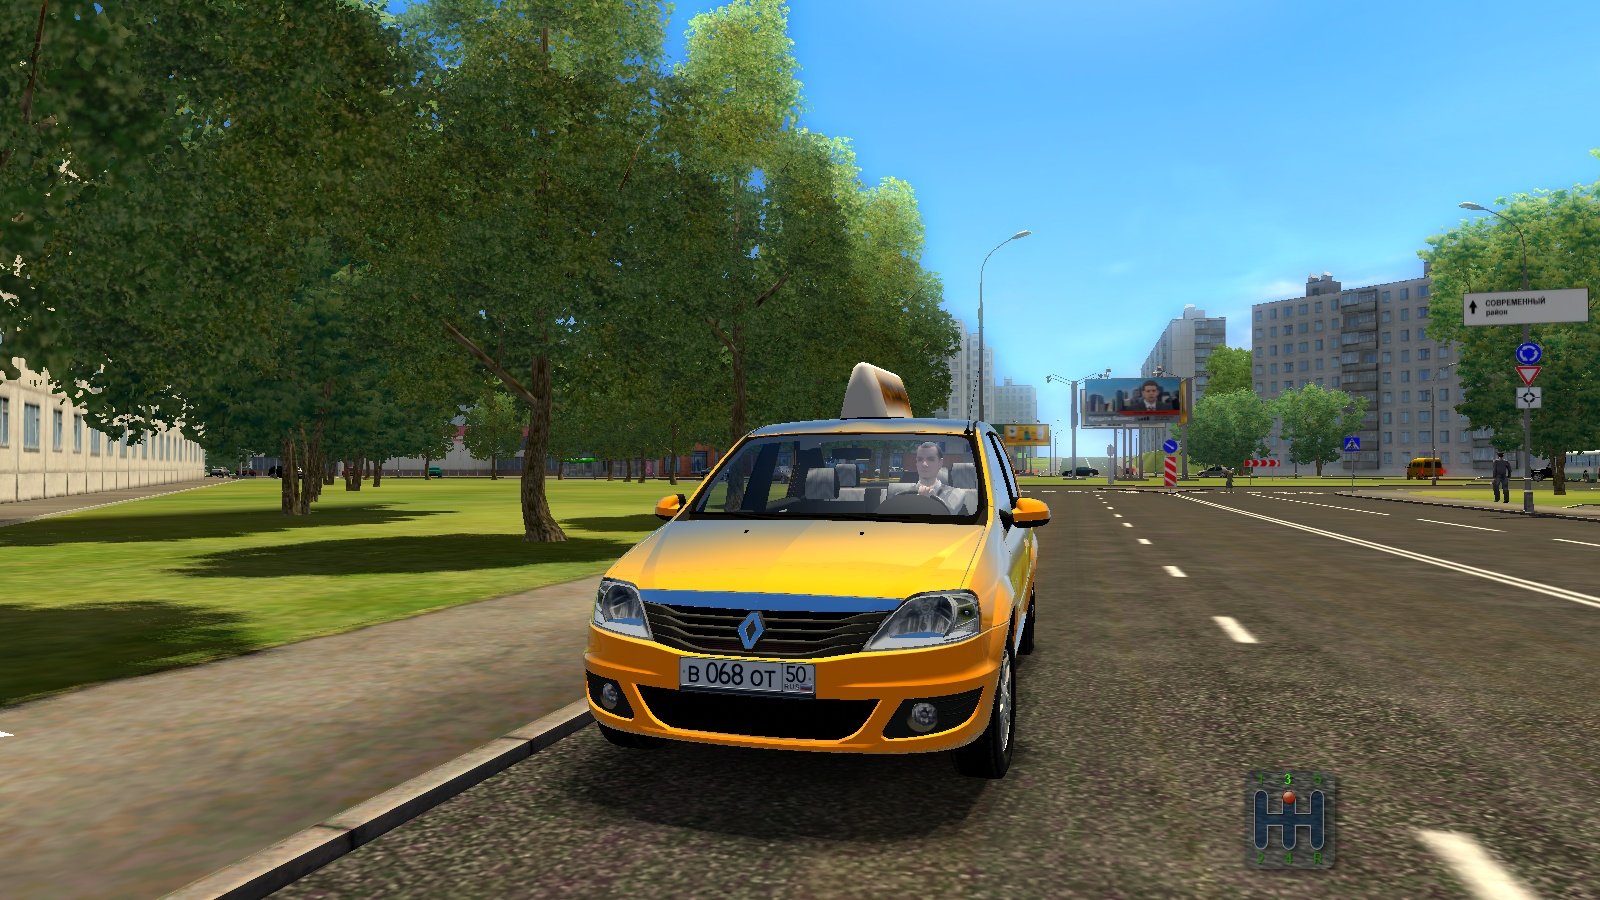 Taxi life a city driving simulator читы. Рено Логан Сити кар. City car Driving Рено Логан. Renault Logan Сити кар драйвинг. City car Driving такси.